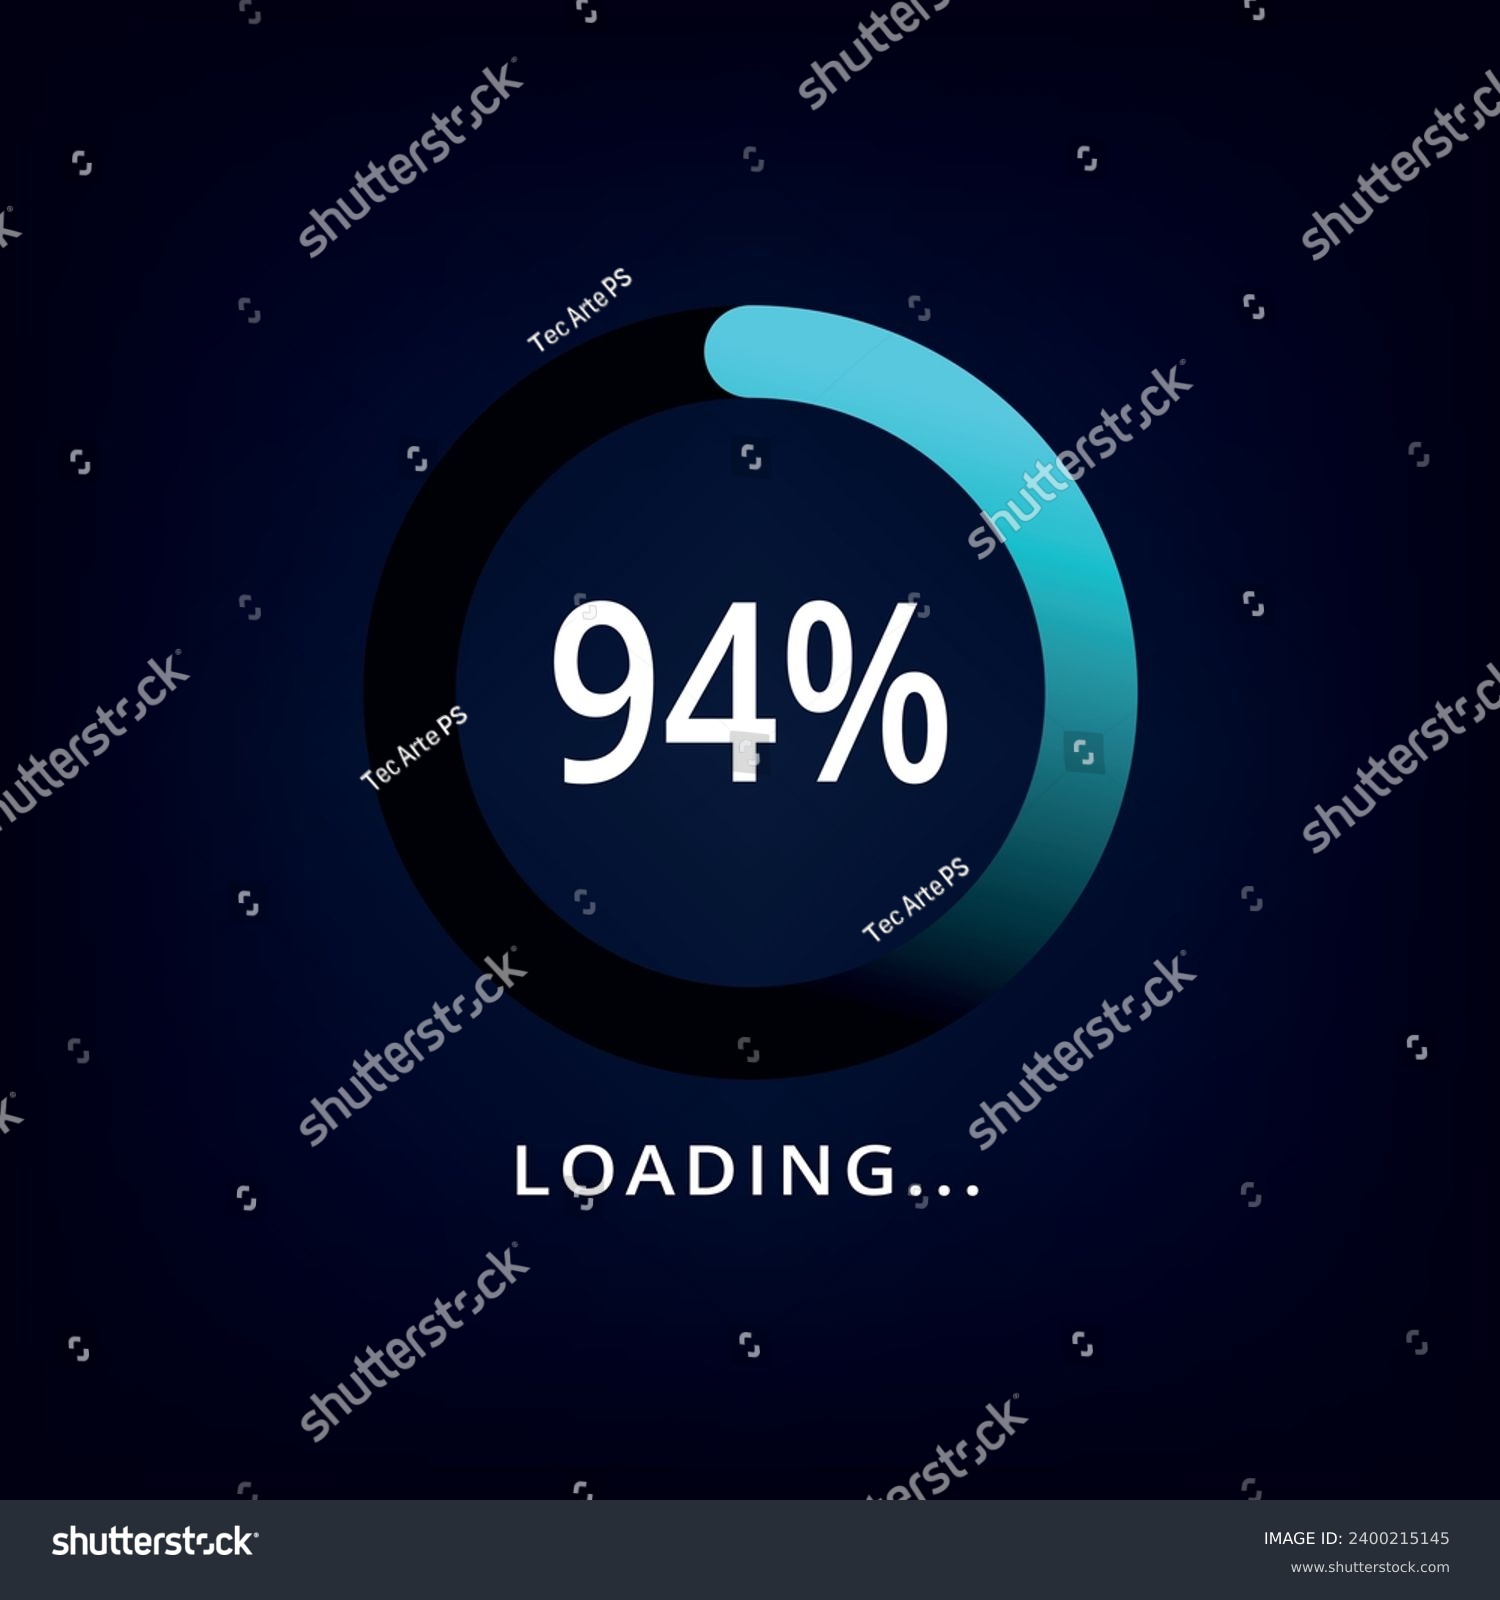 SVG of Loading bar vector illustration in blue color isolated on dark background. Circle loading bar with 94% progress. svg